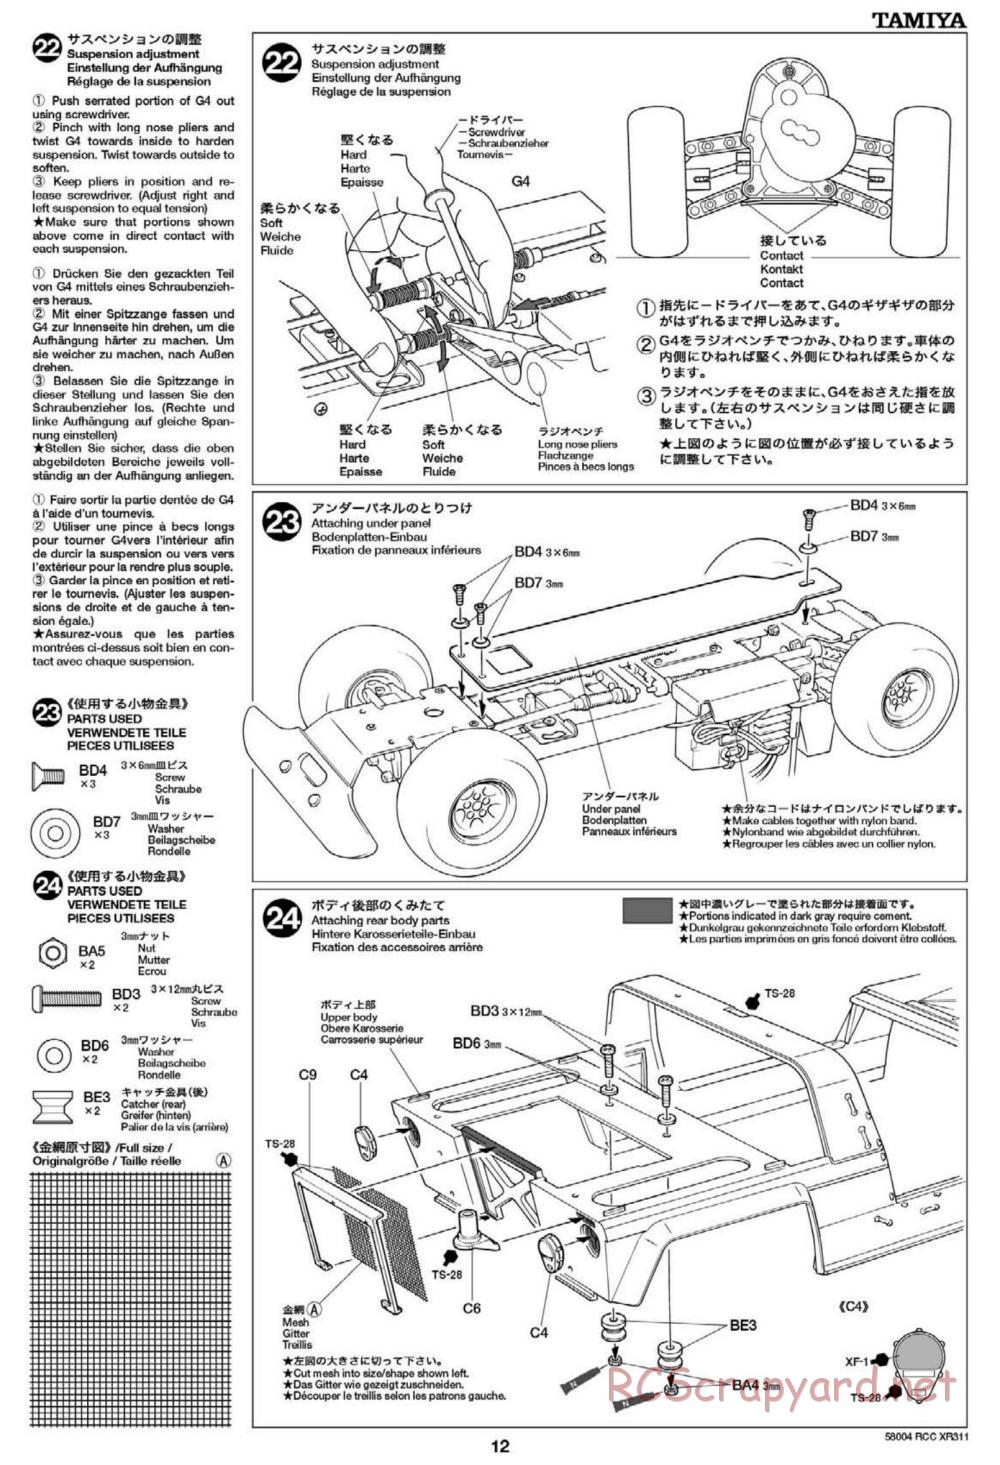 Tamiya - XR311 Combat Support Vehicle (2012) Chassis - Manual - Page 12